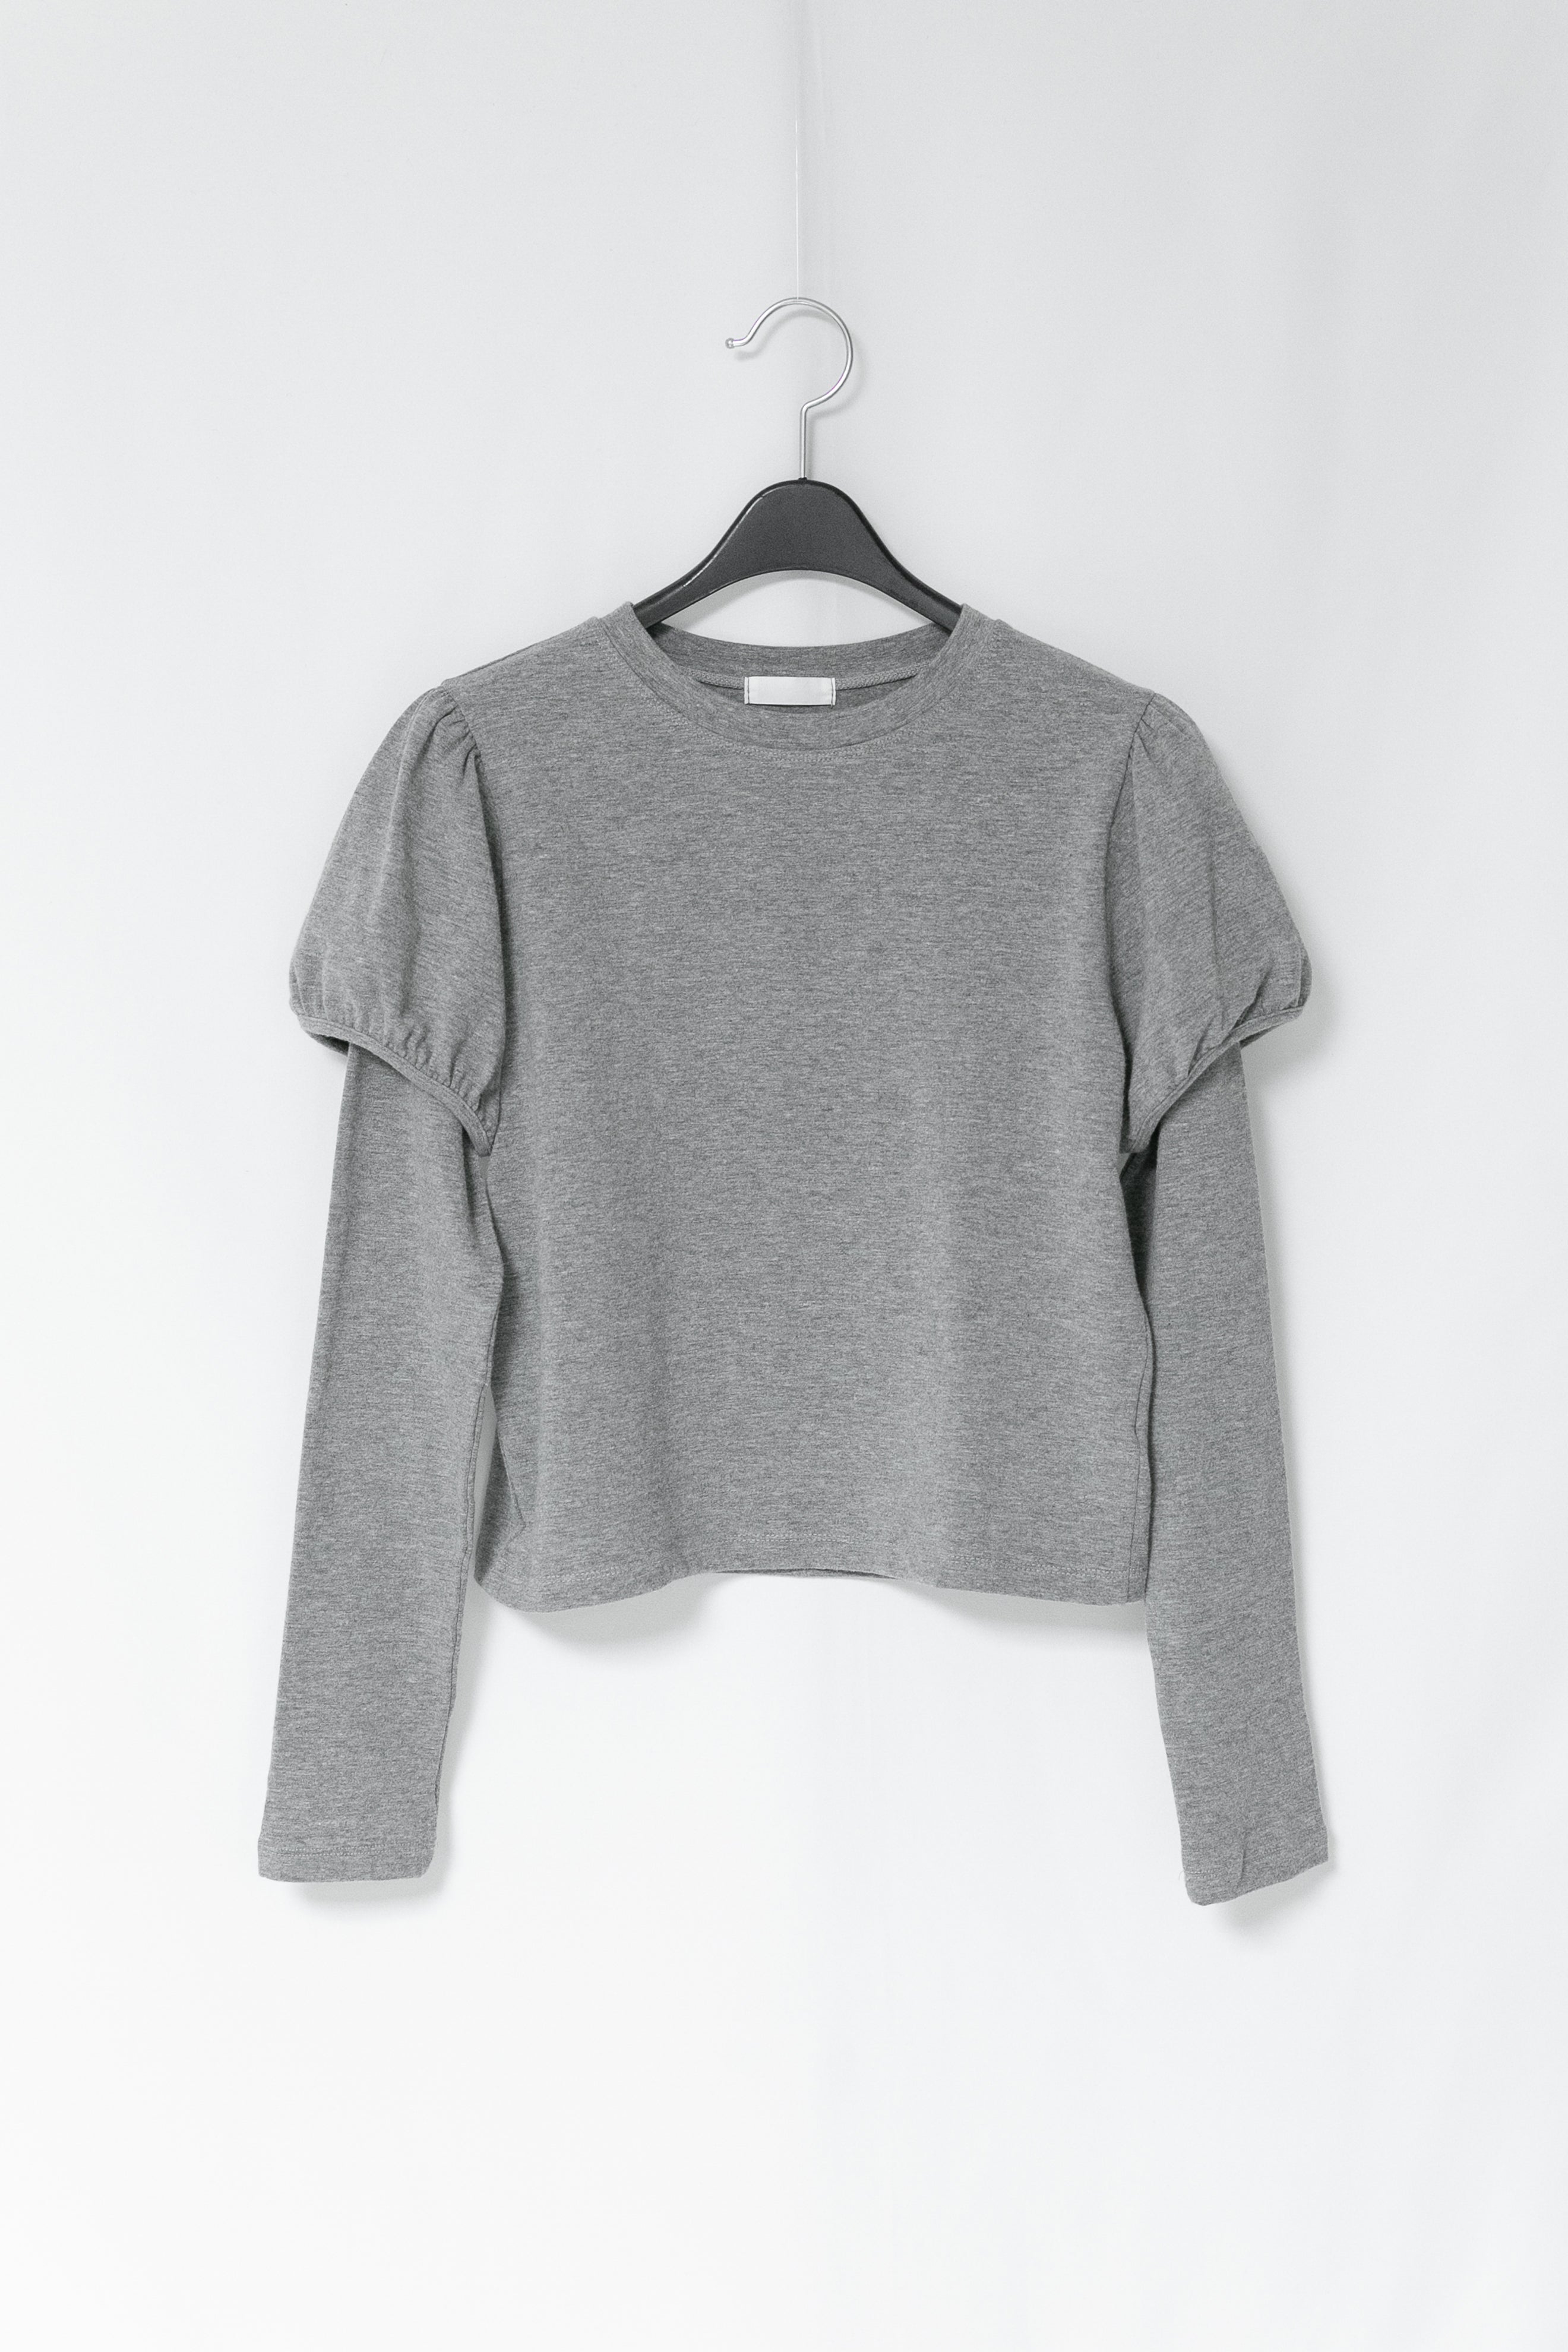 puff long sleeve top(3colors)